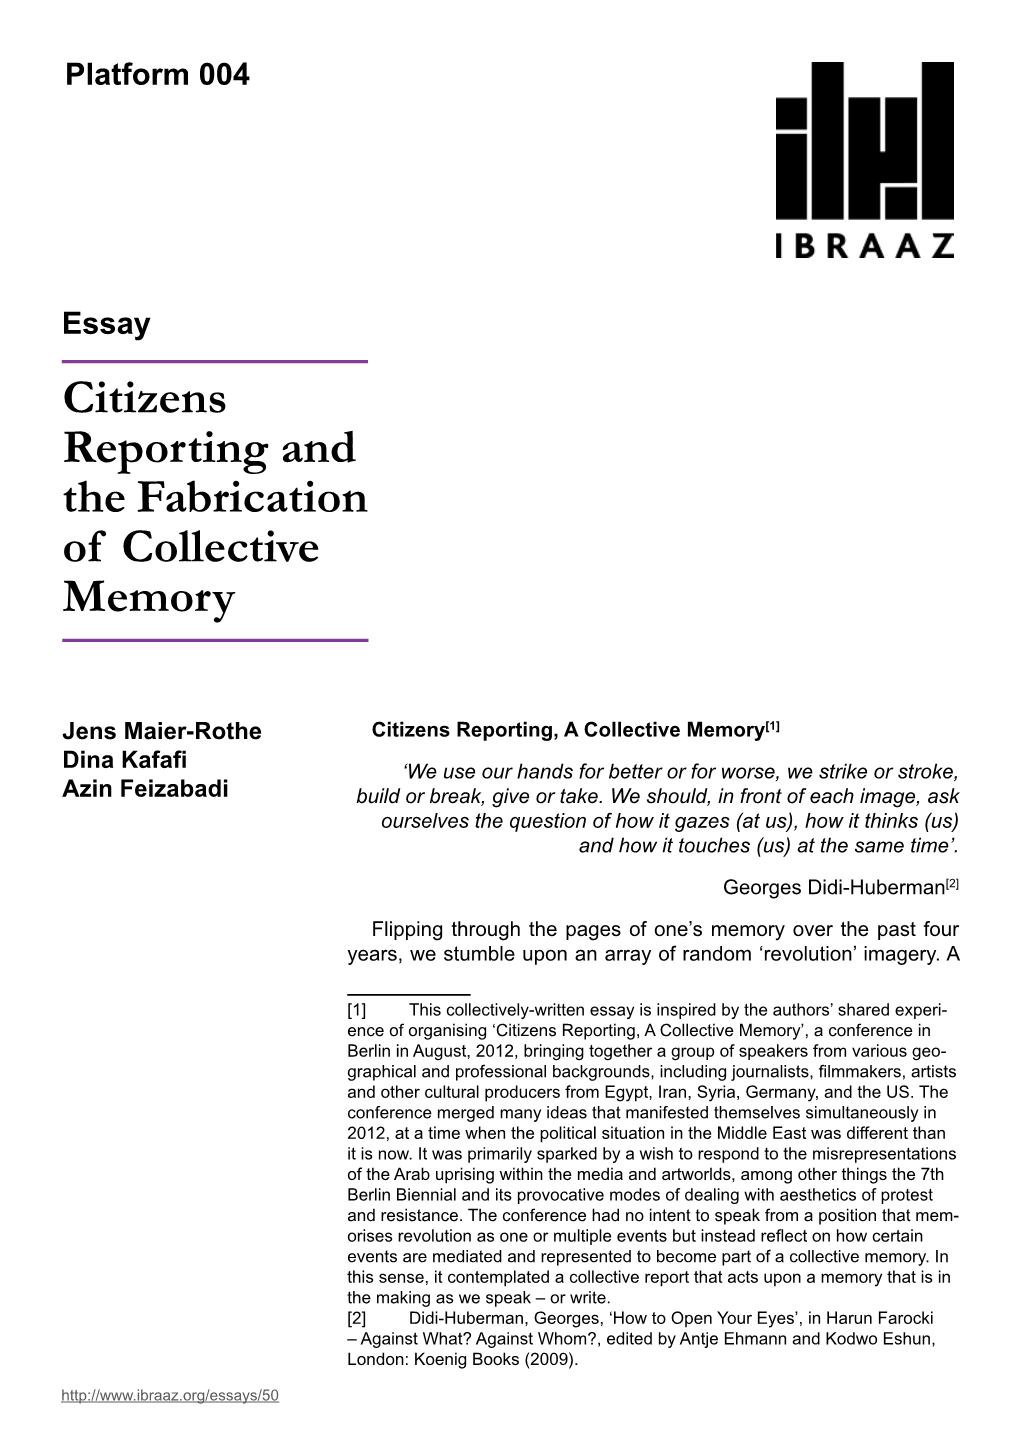 Citizens Reporting and the Fabrication of Collective Memory